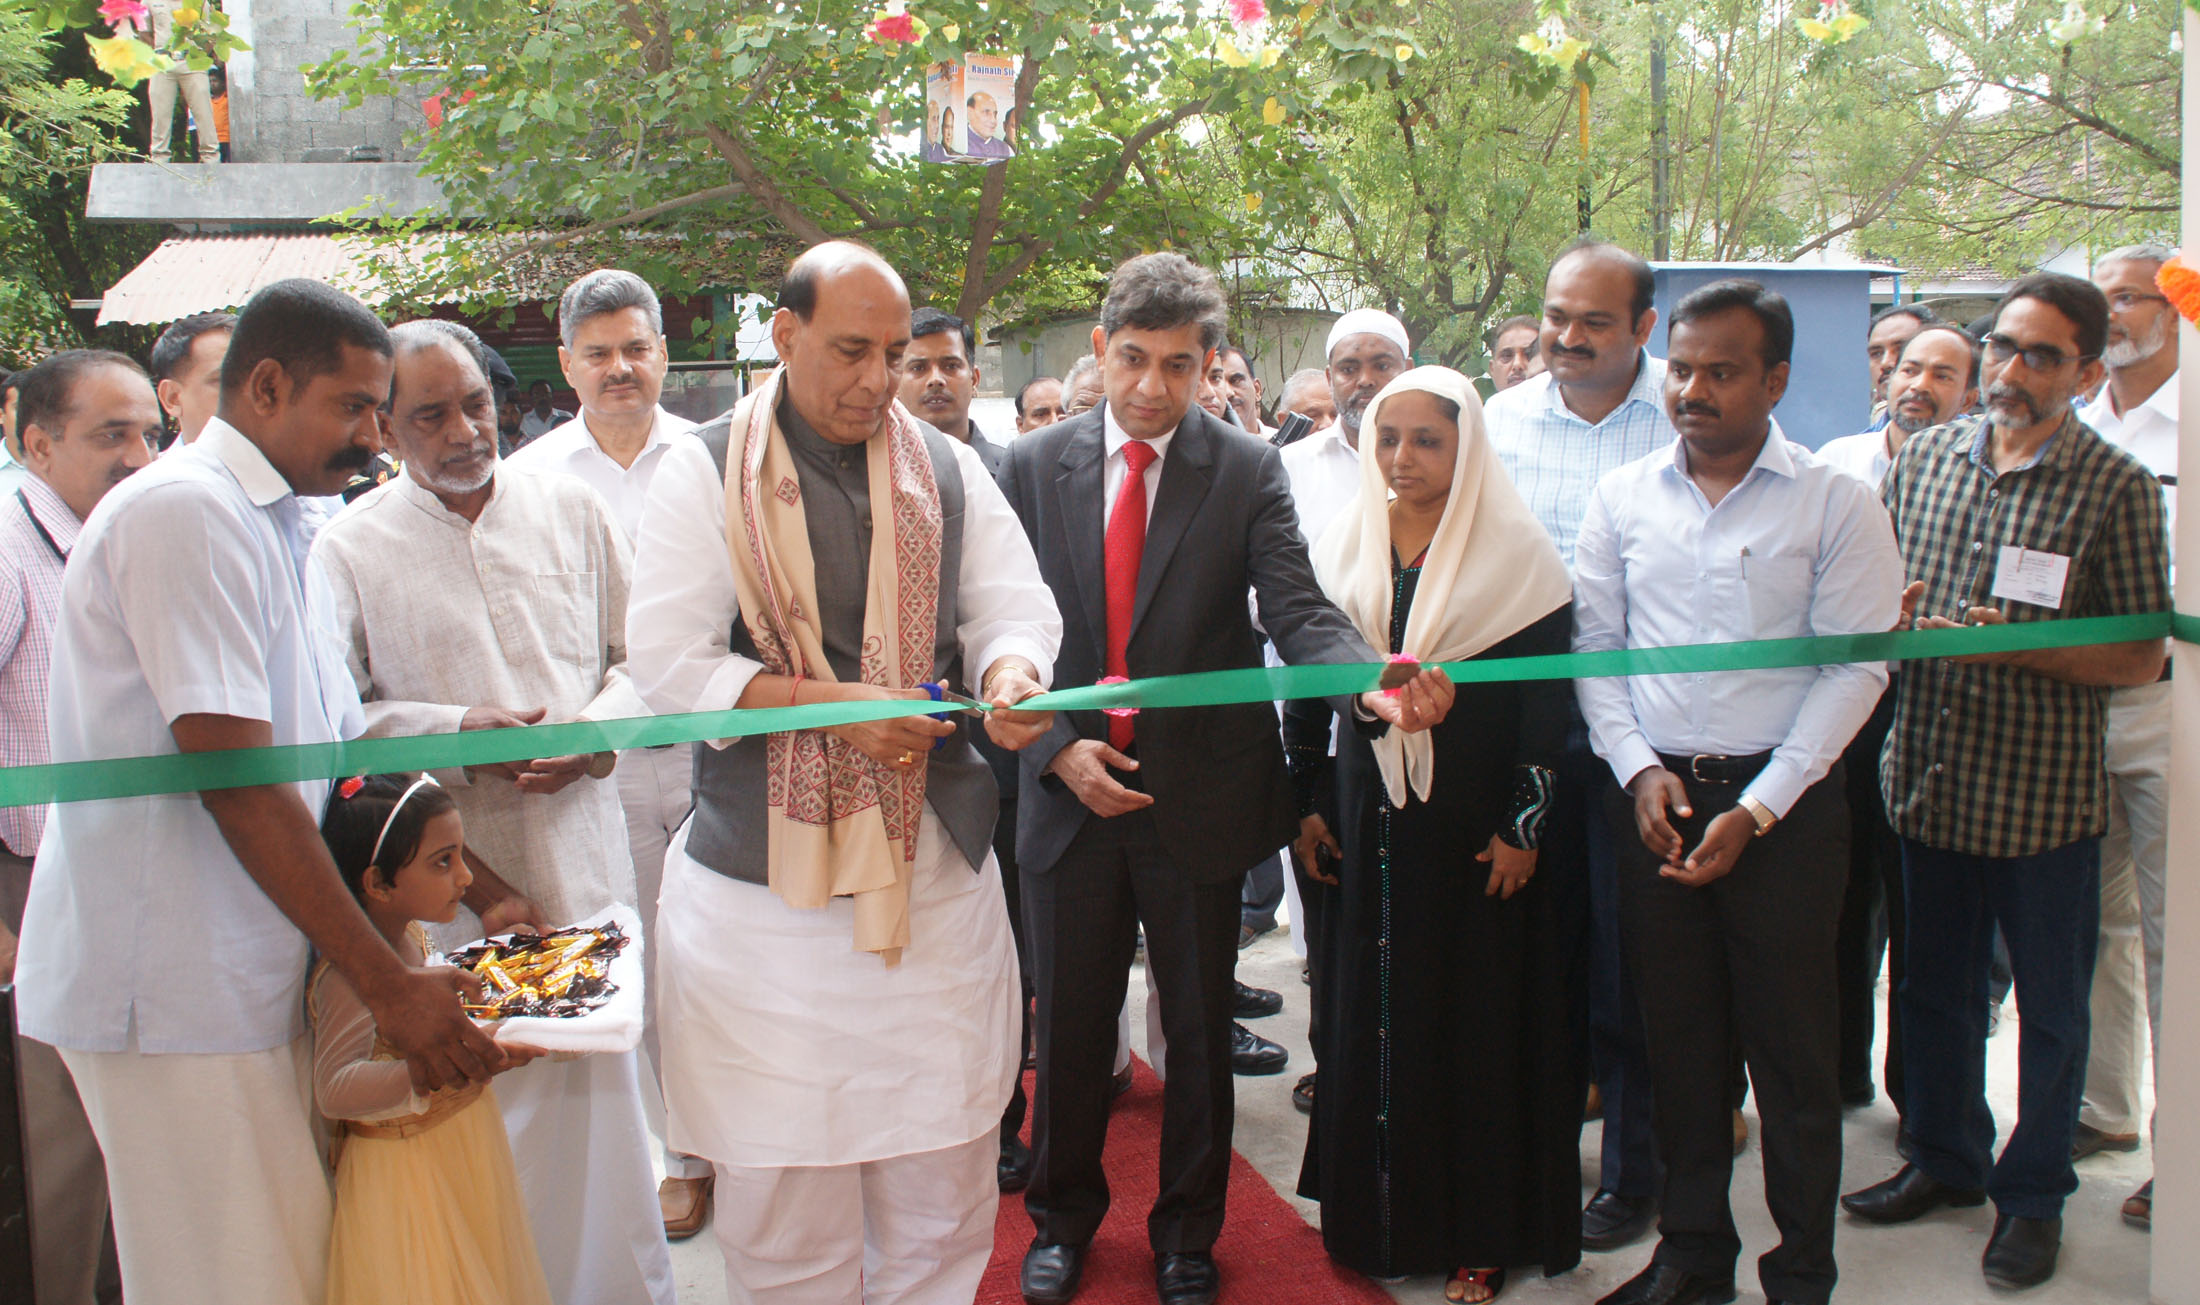 The Union Home Minister, Shri Rajnath Singh inaugurating the new office building of Department of Information and Public Relations, at Kavaratti, Lakshadweep on February 06, 2016.